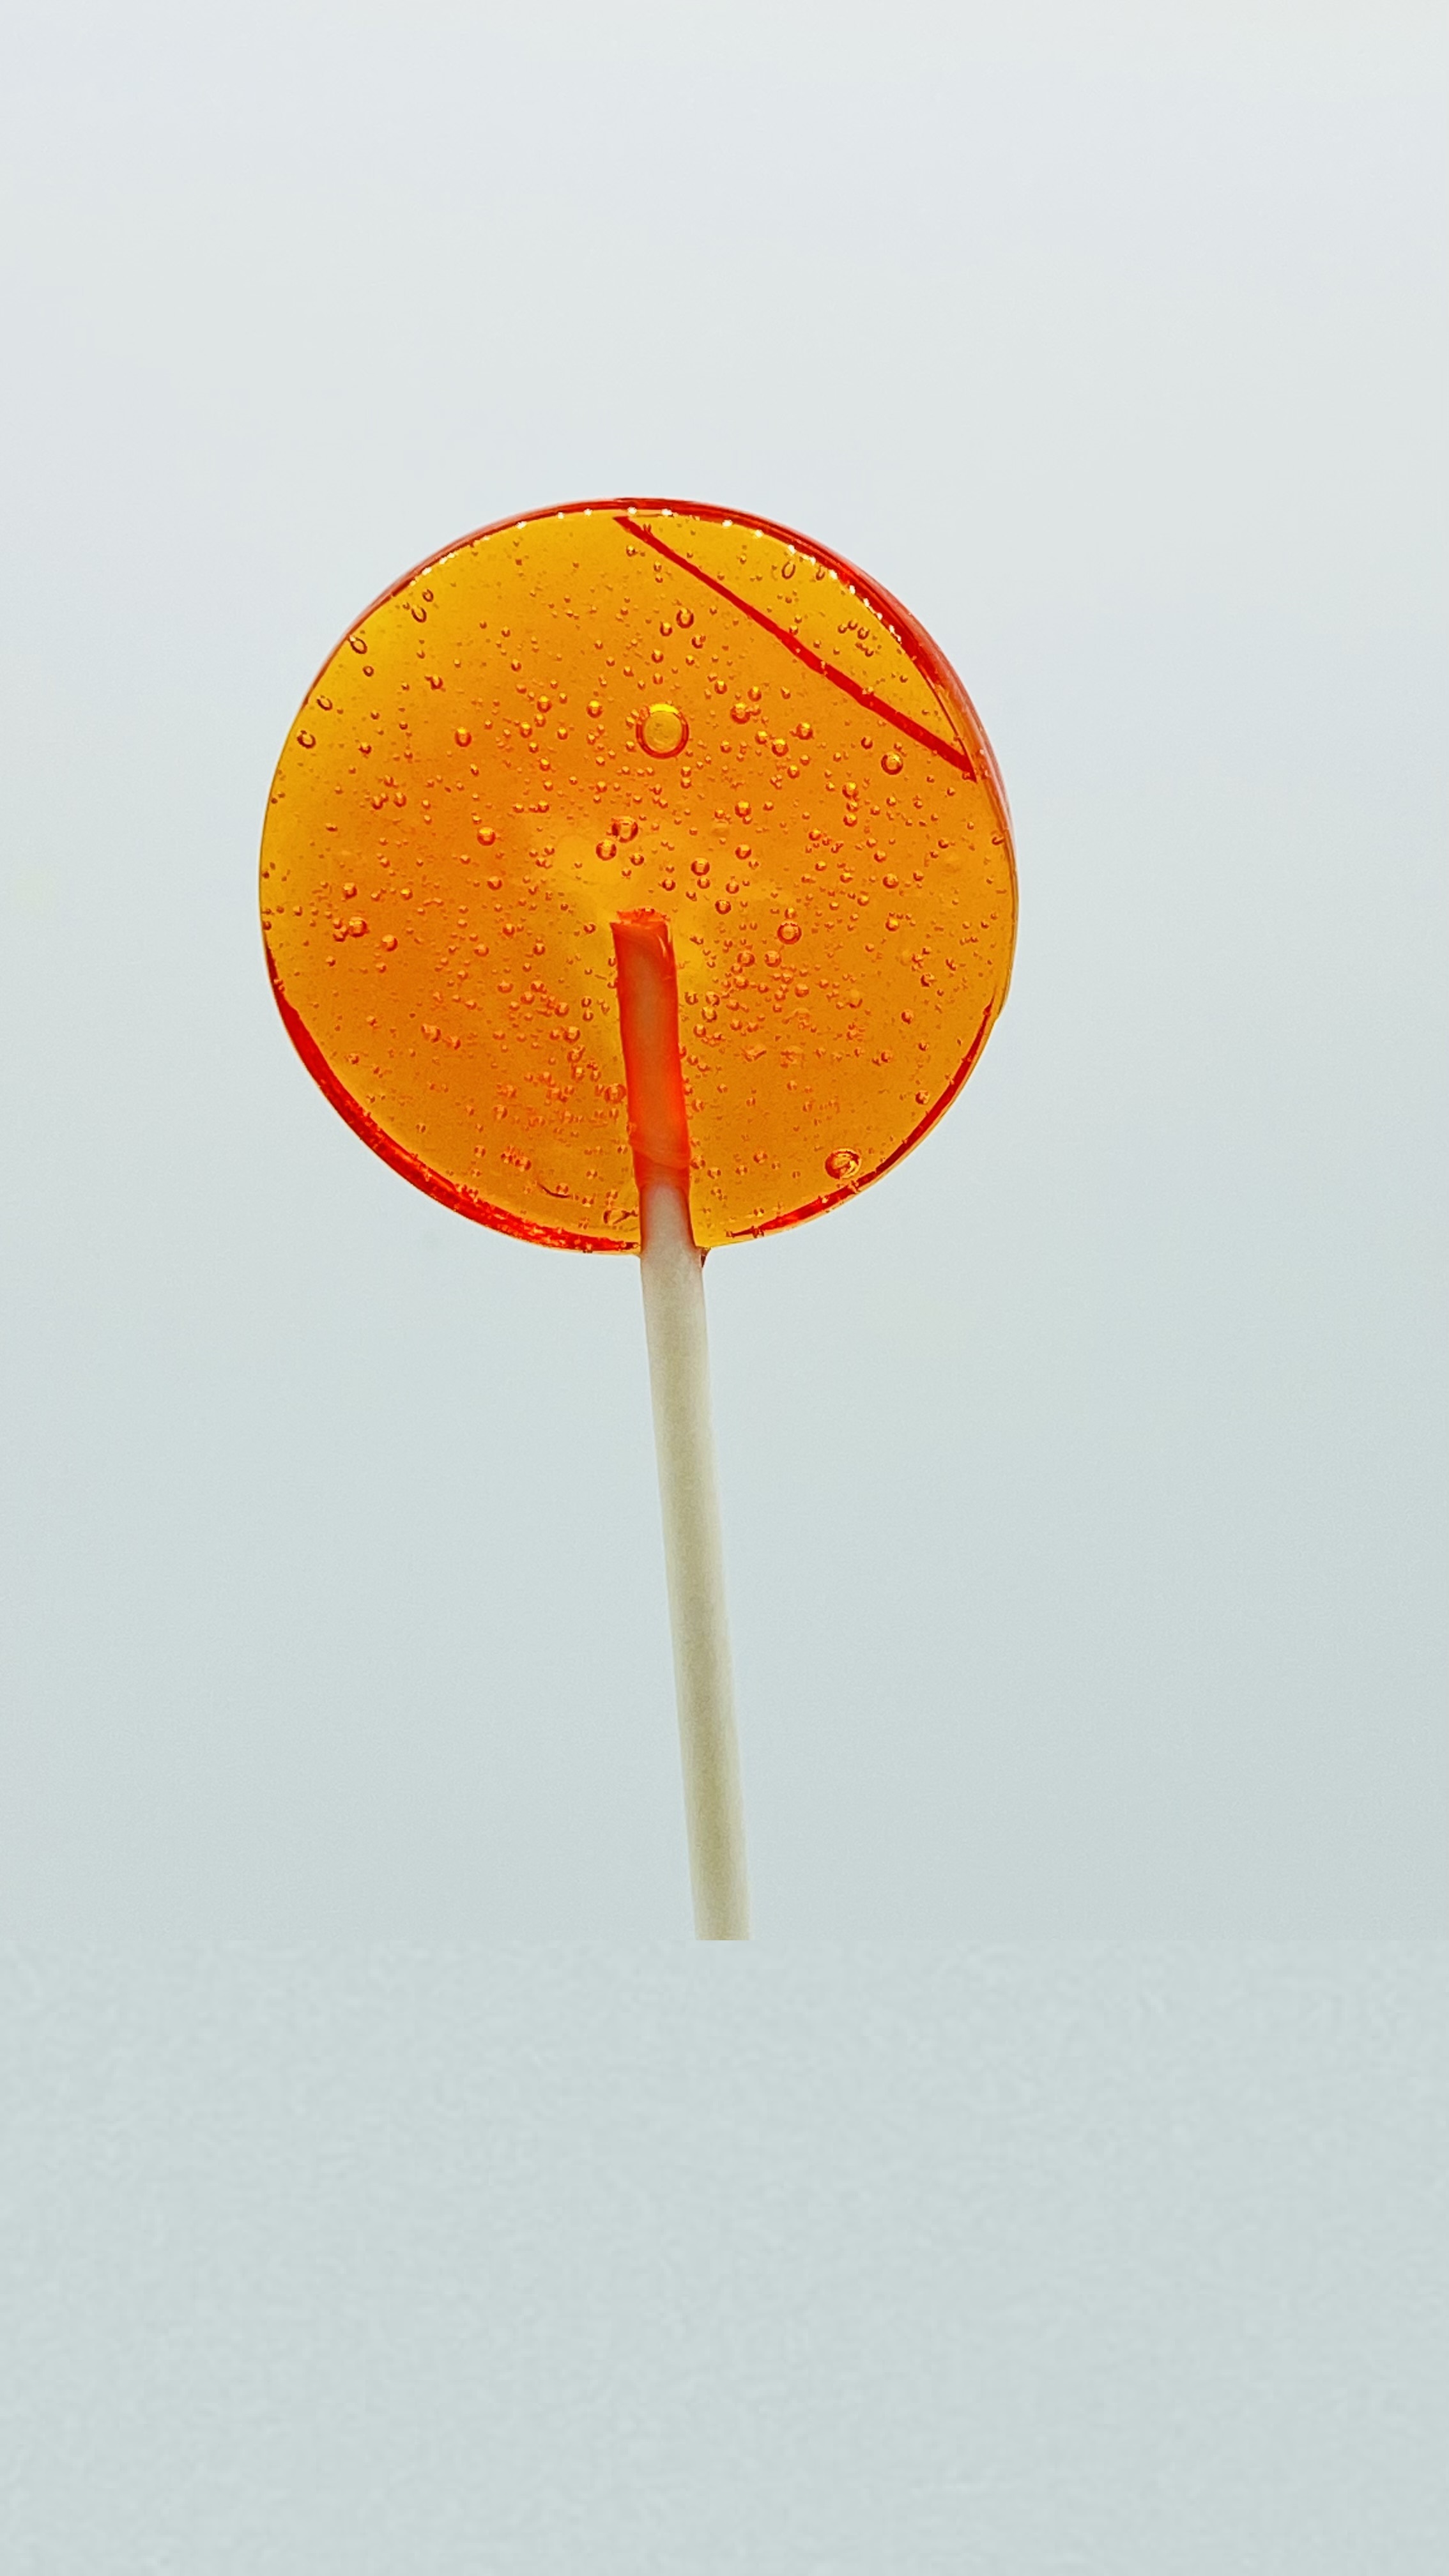 Black Carrot orange in hard boiled candy lollies